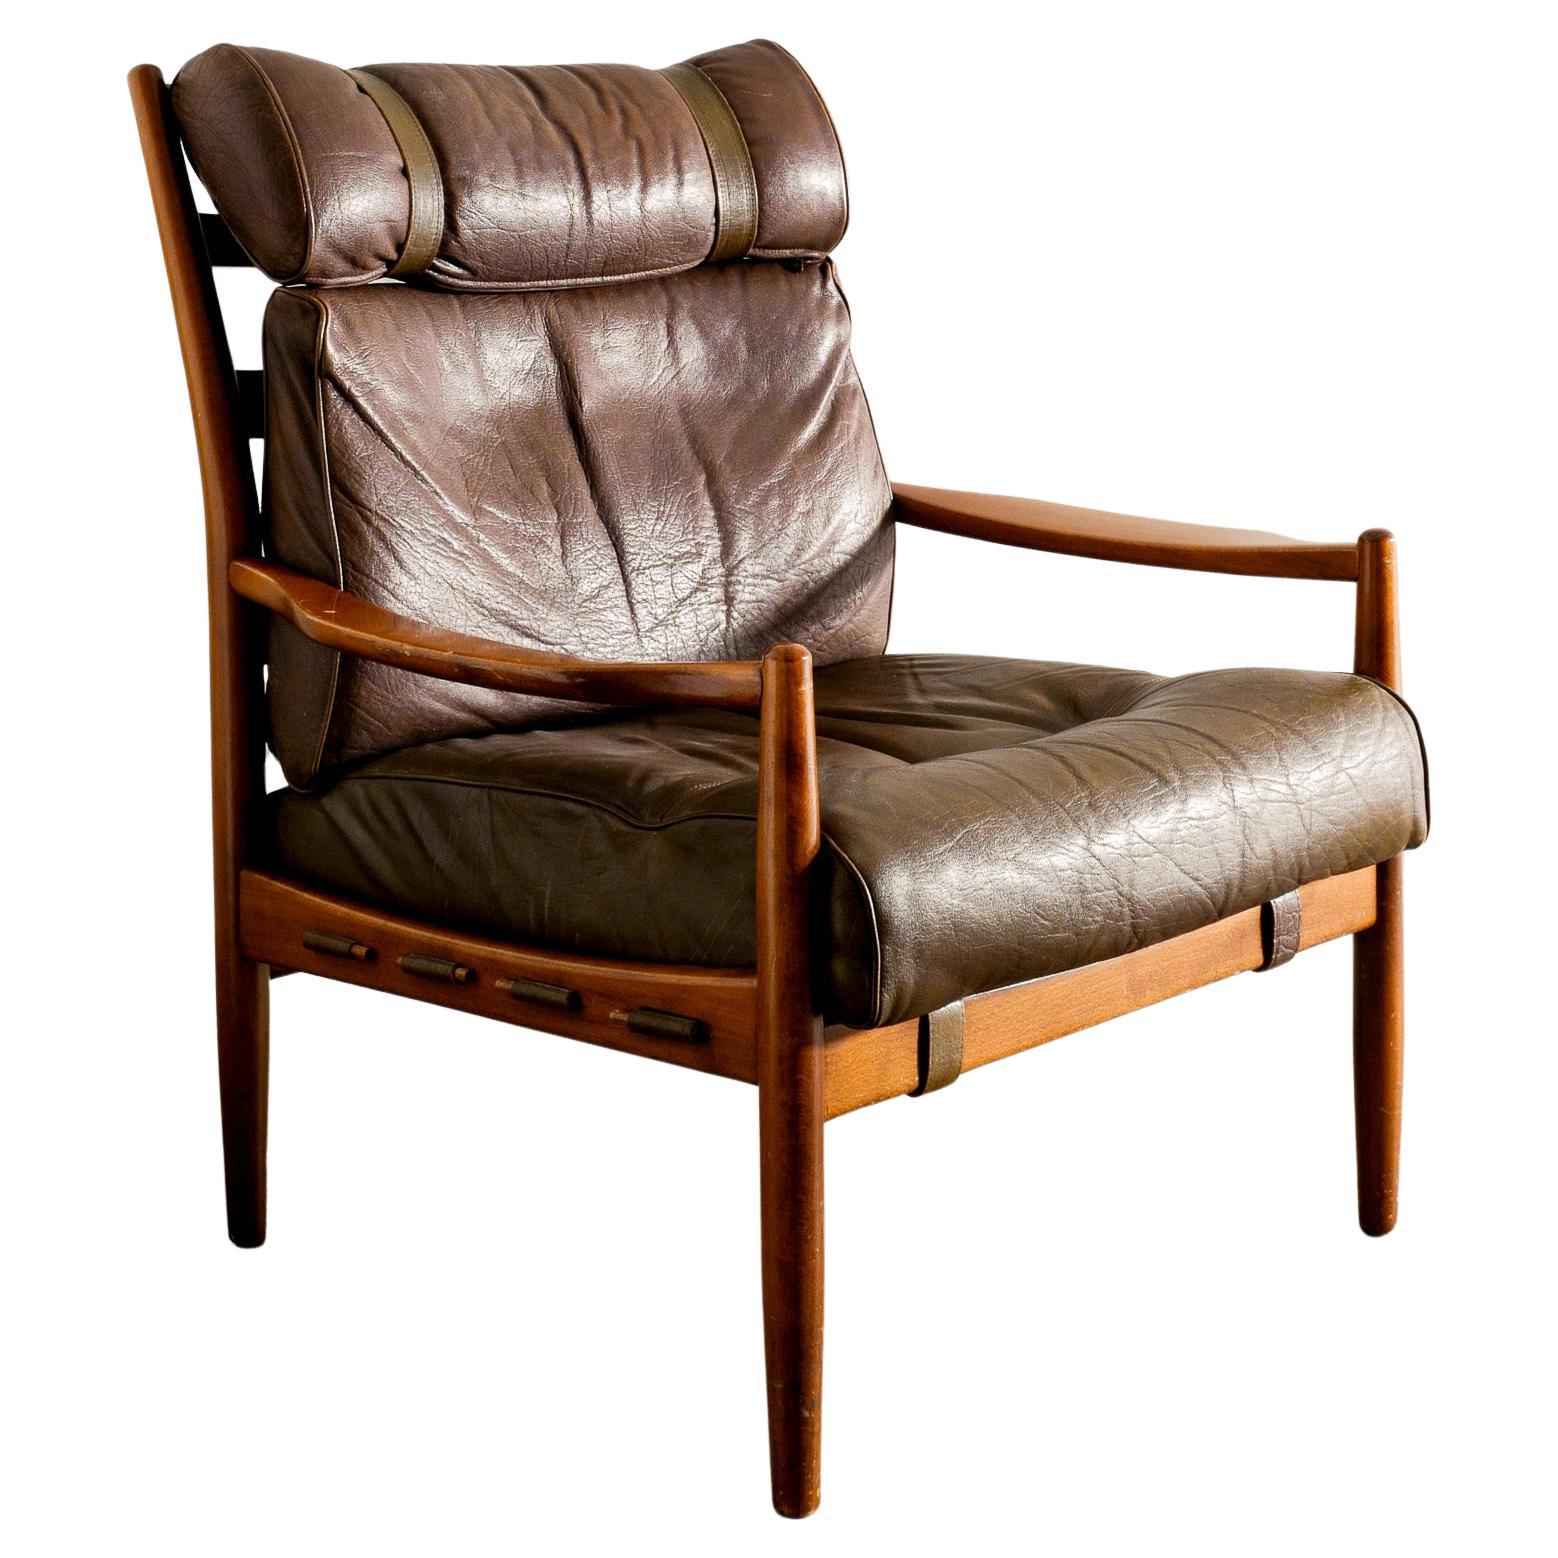 Swedish Mid Century Armchair in Leather & Walnut in style of Arne Norell, 1950s  For Sale